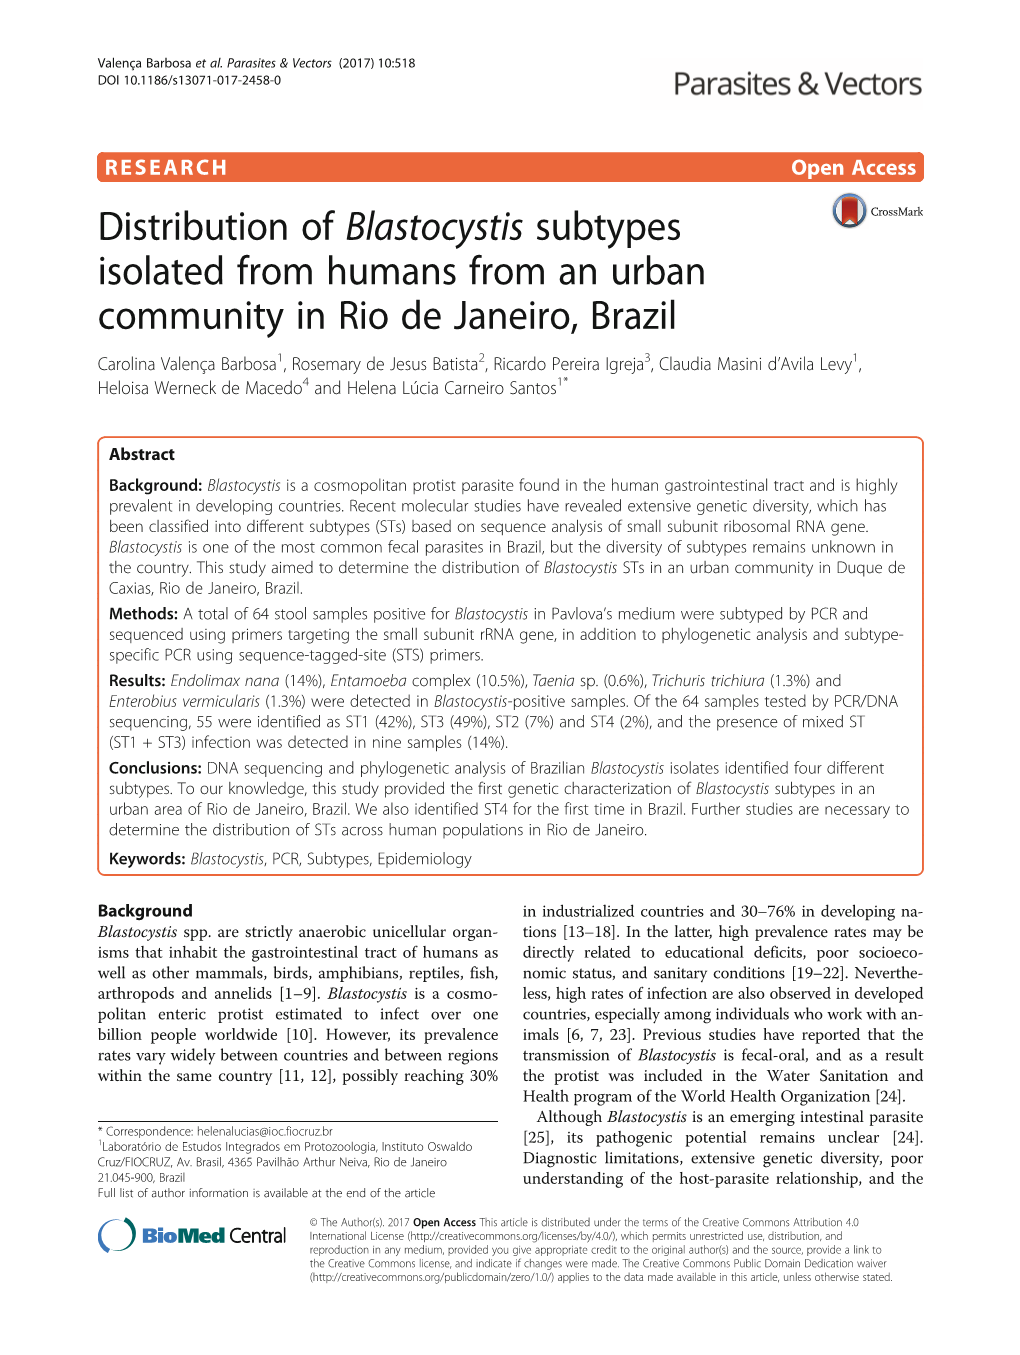 Distribution of Blastocystis Subtypes Isolated from Humans from An